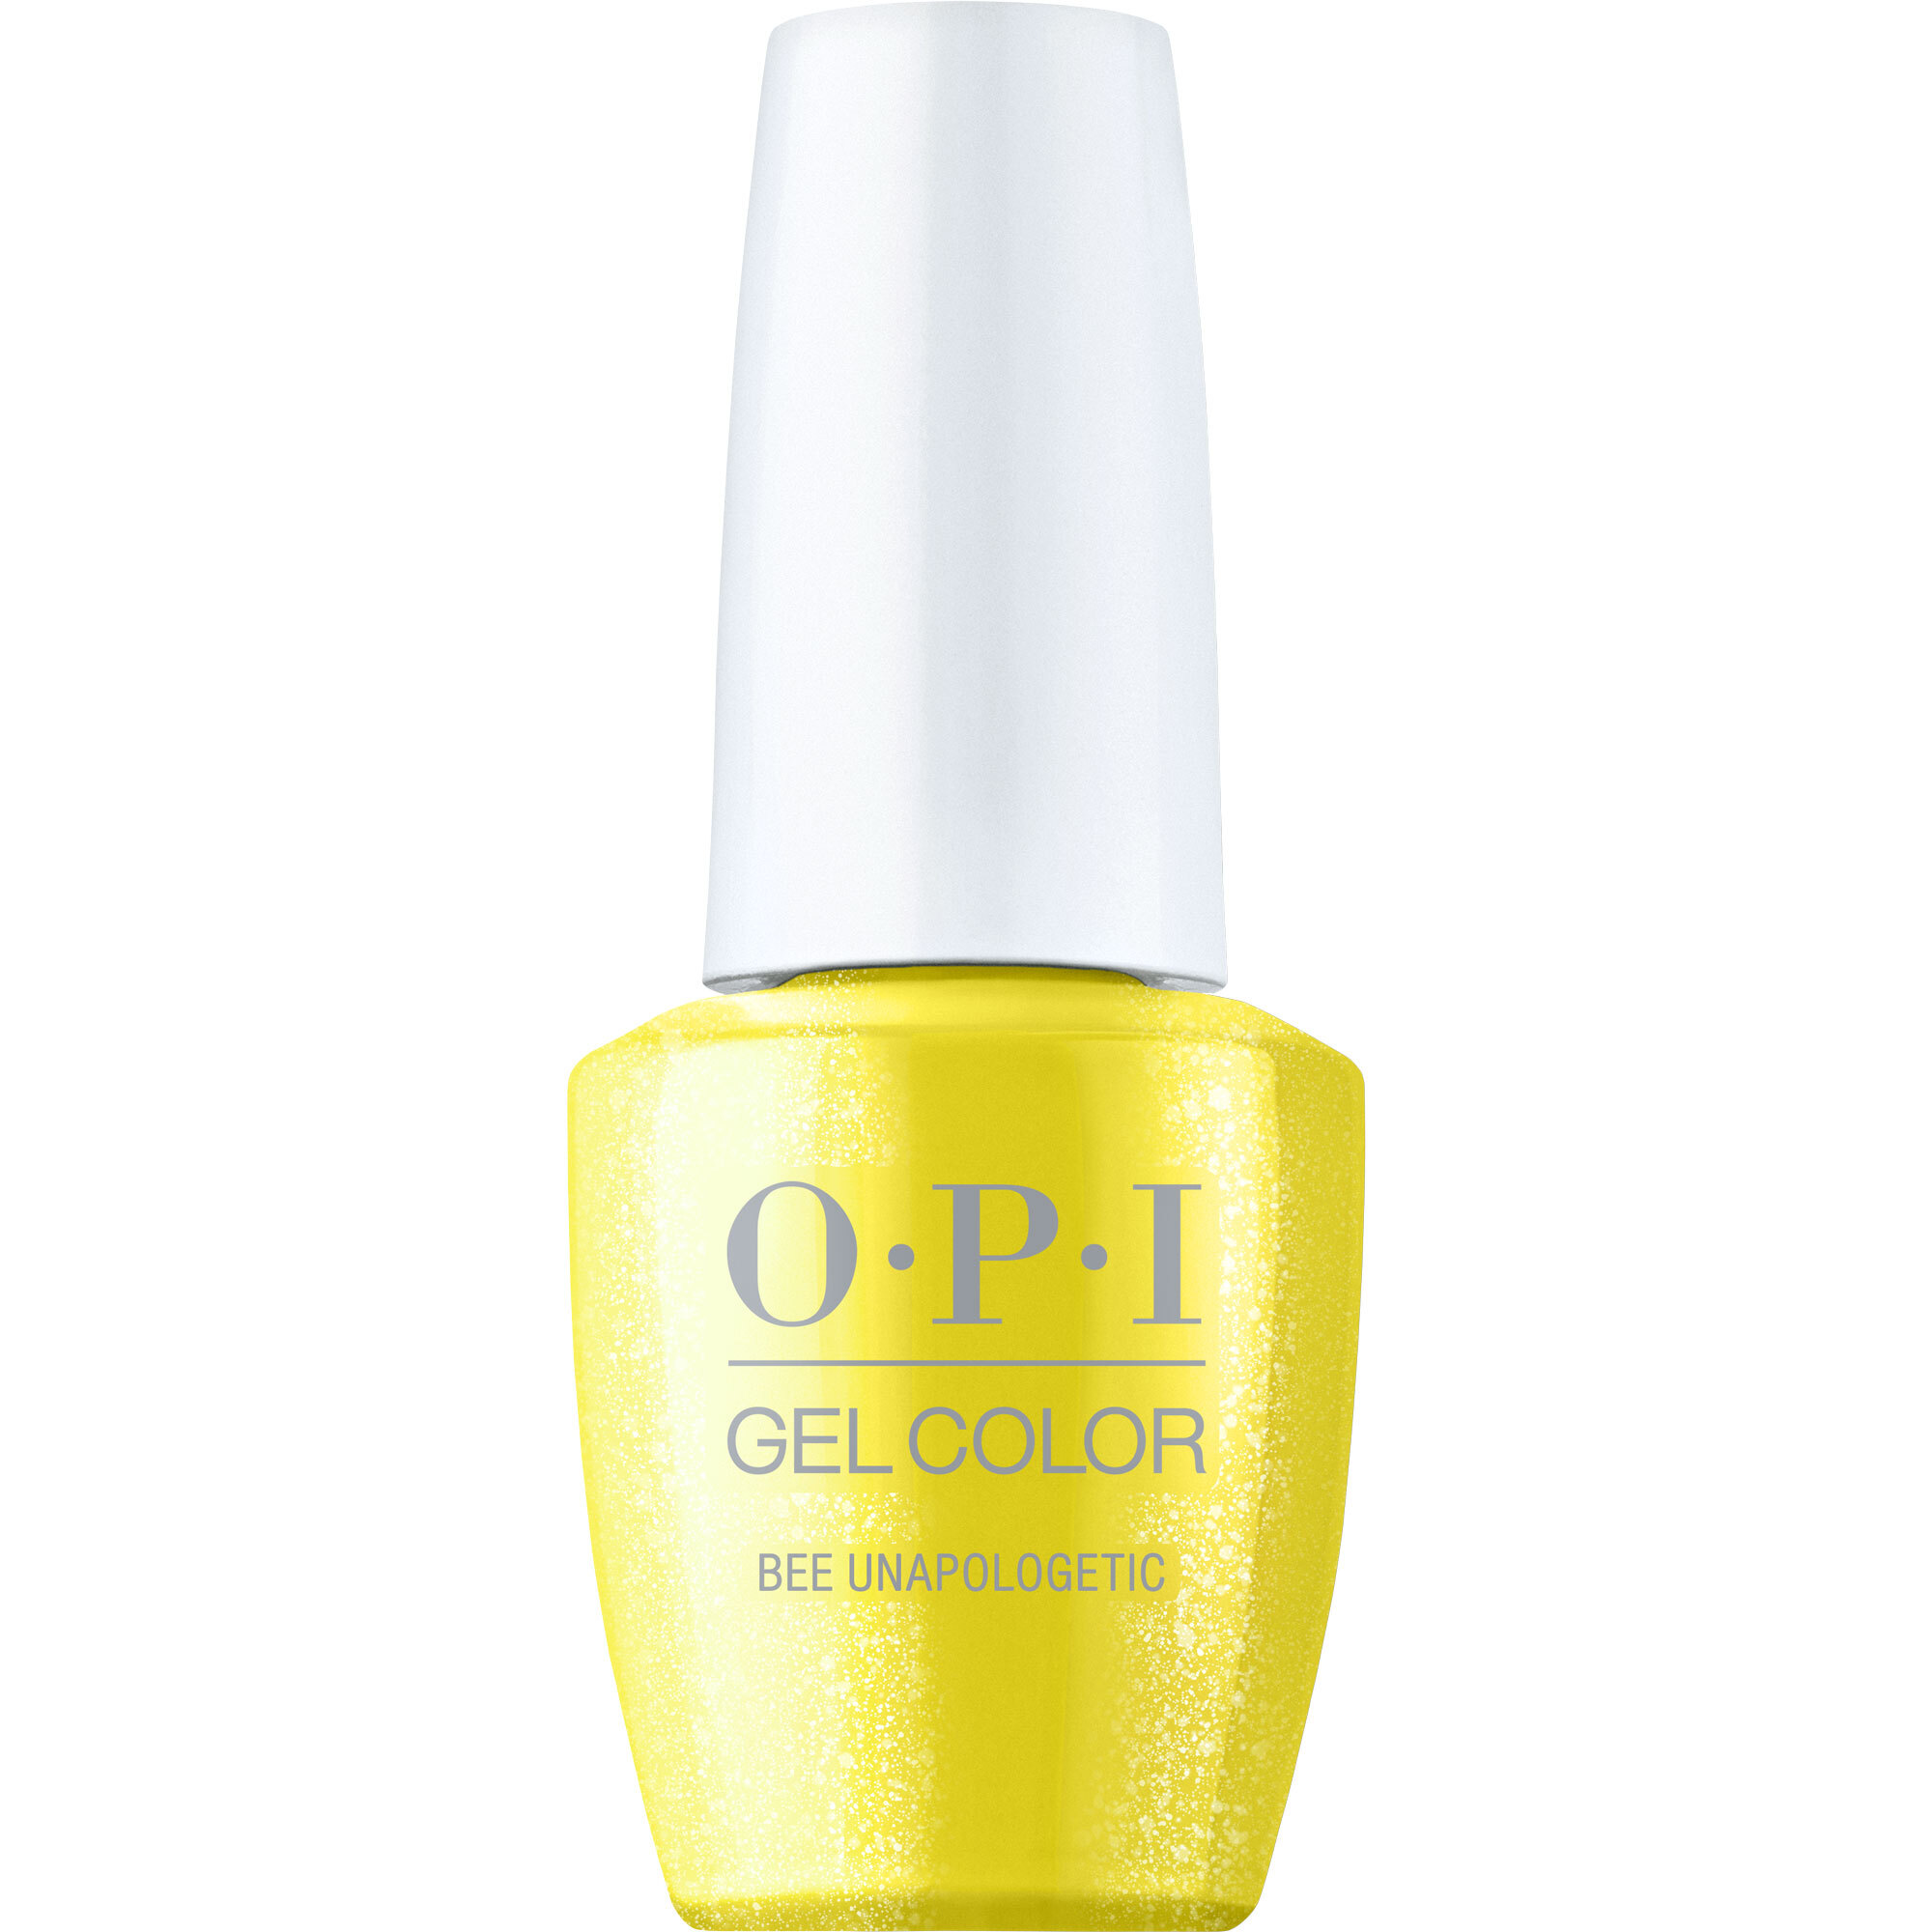 OPI Gel Color 360 - Bee Unapologetic